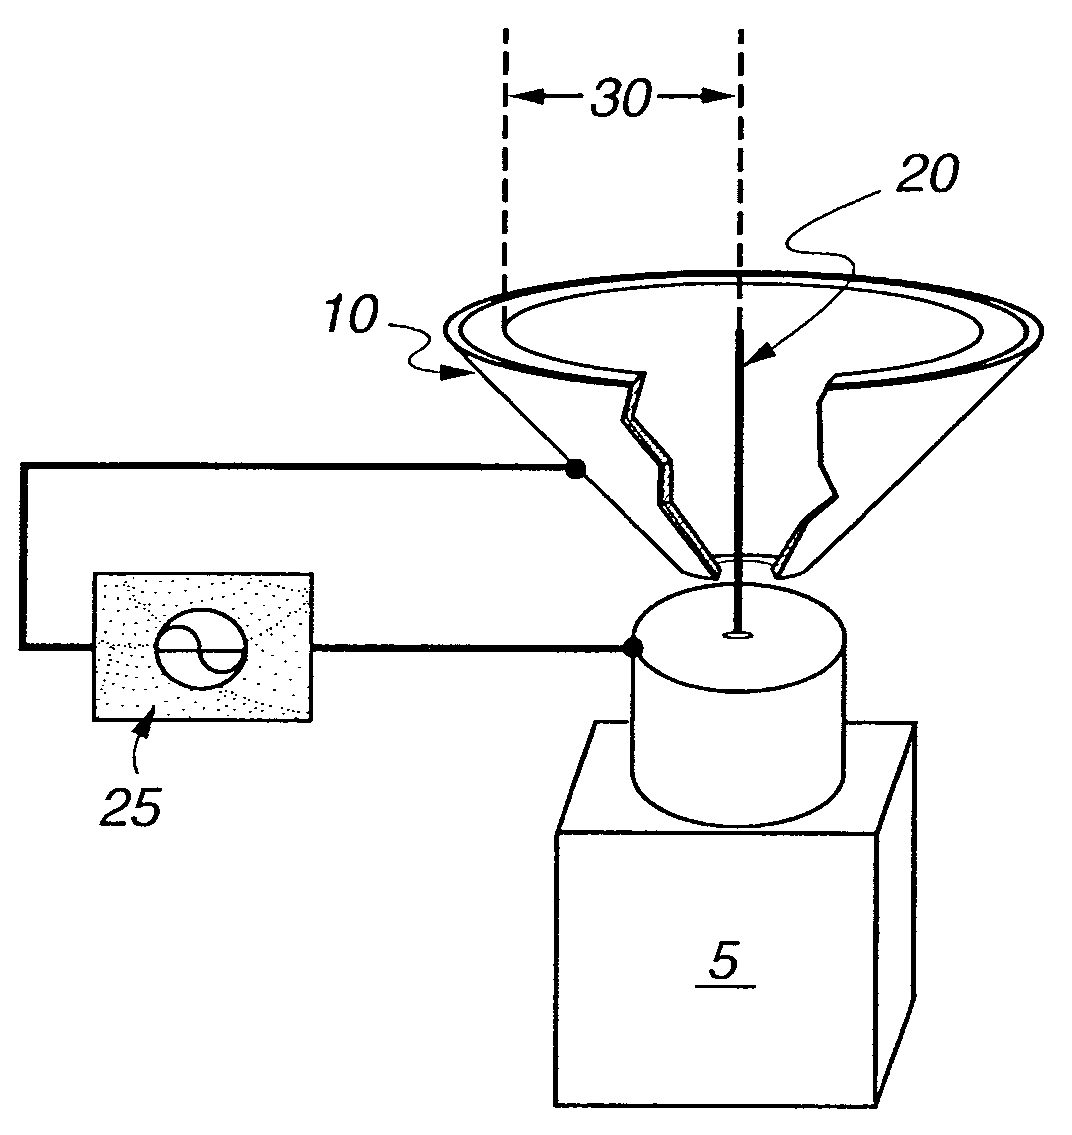 Fuel injector utilizing non-thermal plasma activation